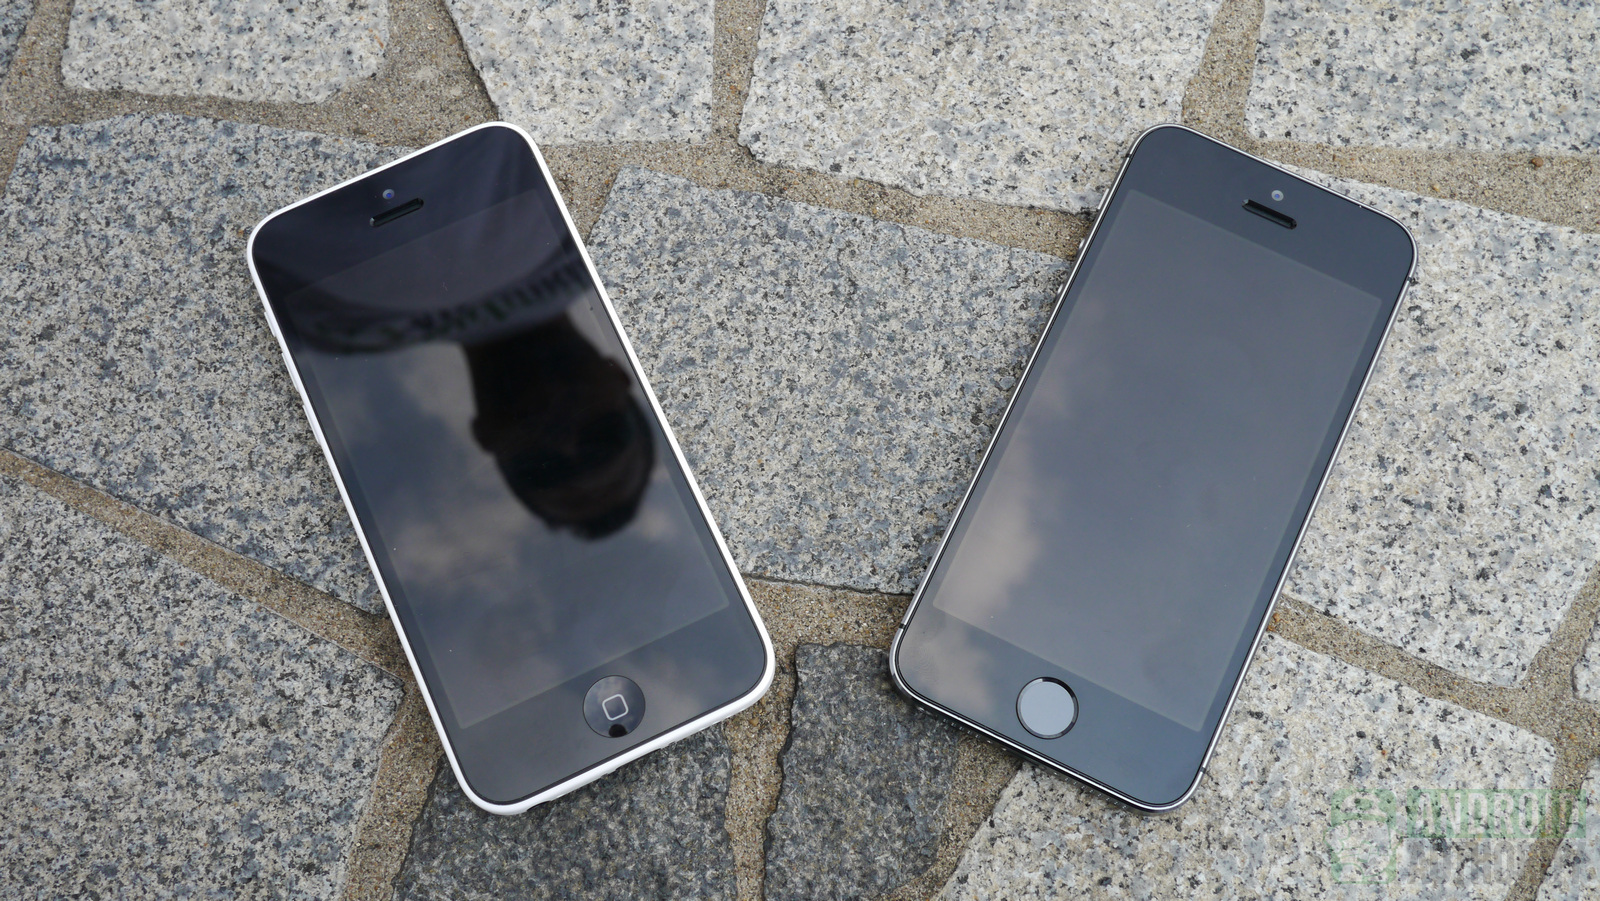 iPhone 5c and iPhone 5s drop test